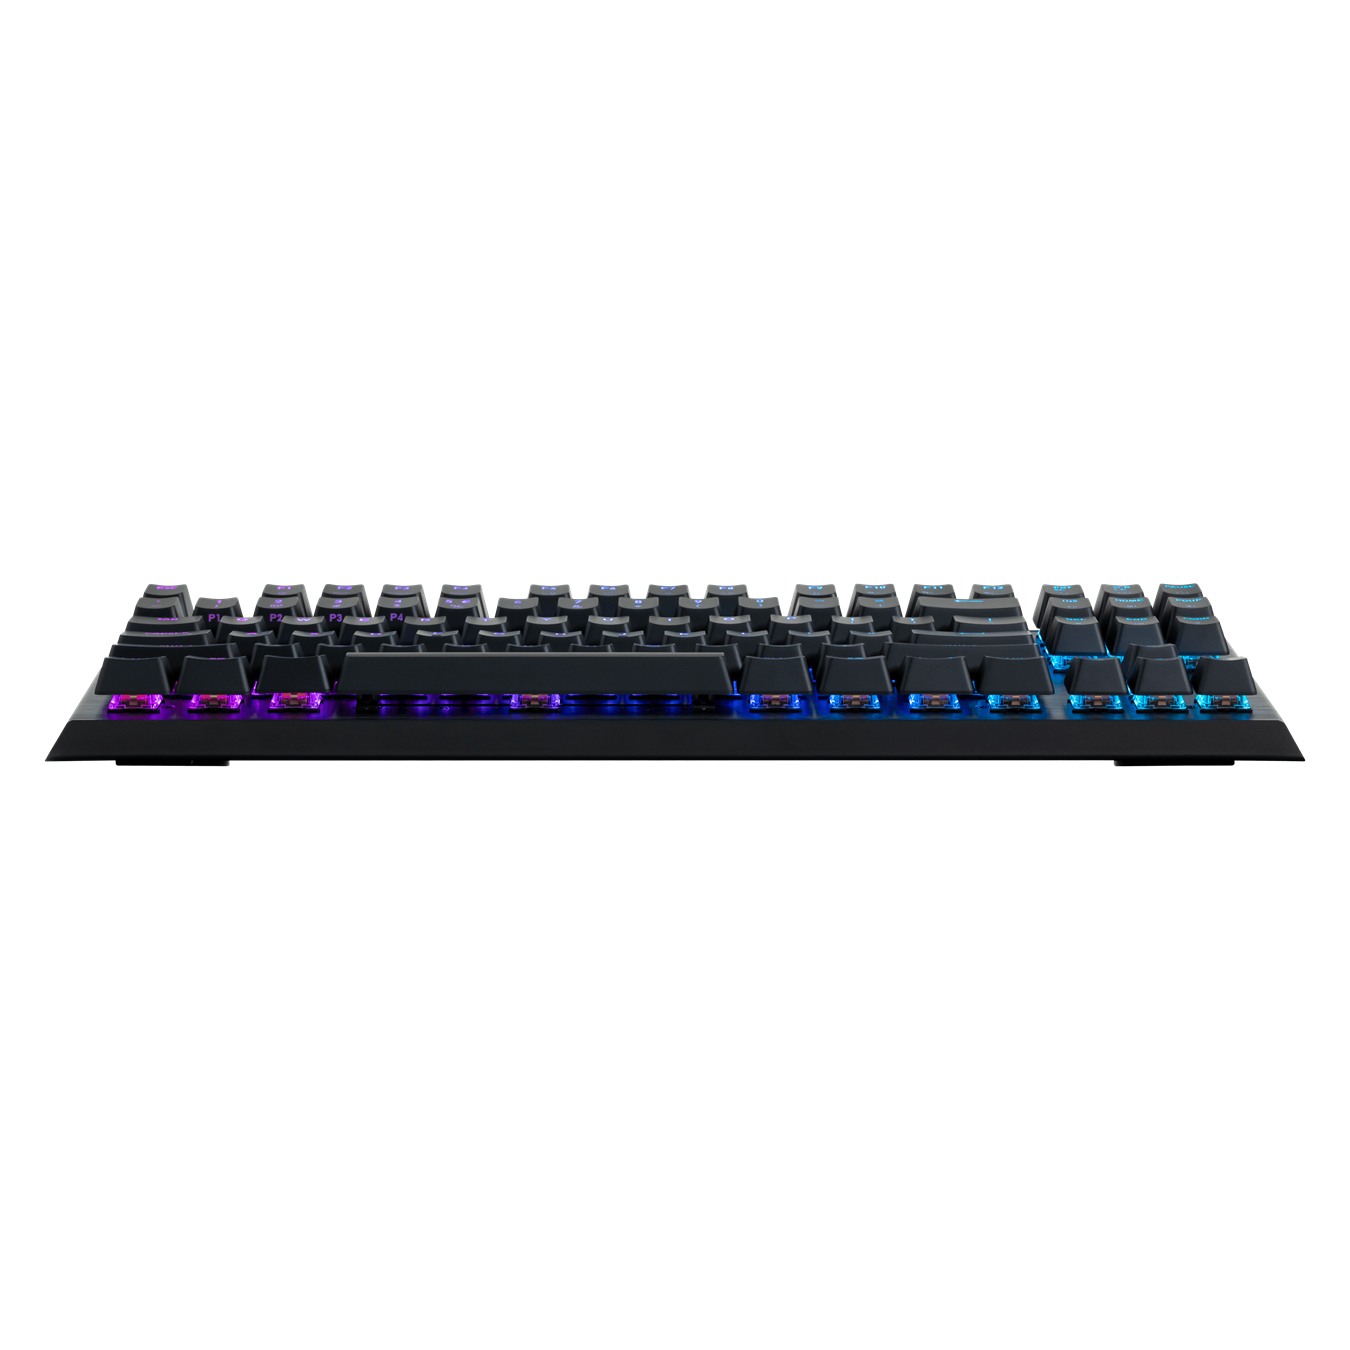 CK530 Mechanical Gaming Keyboard - Map 16.7 million colors to any key, customize lighting modes, and fine-tune macros